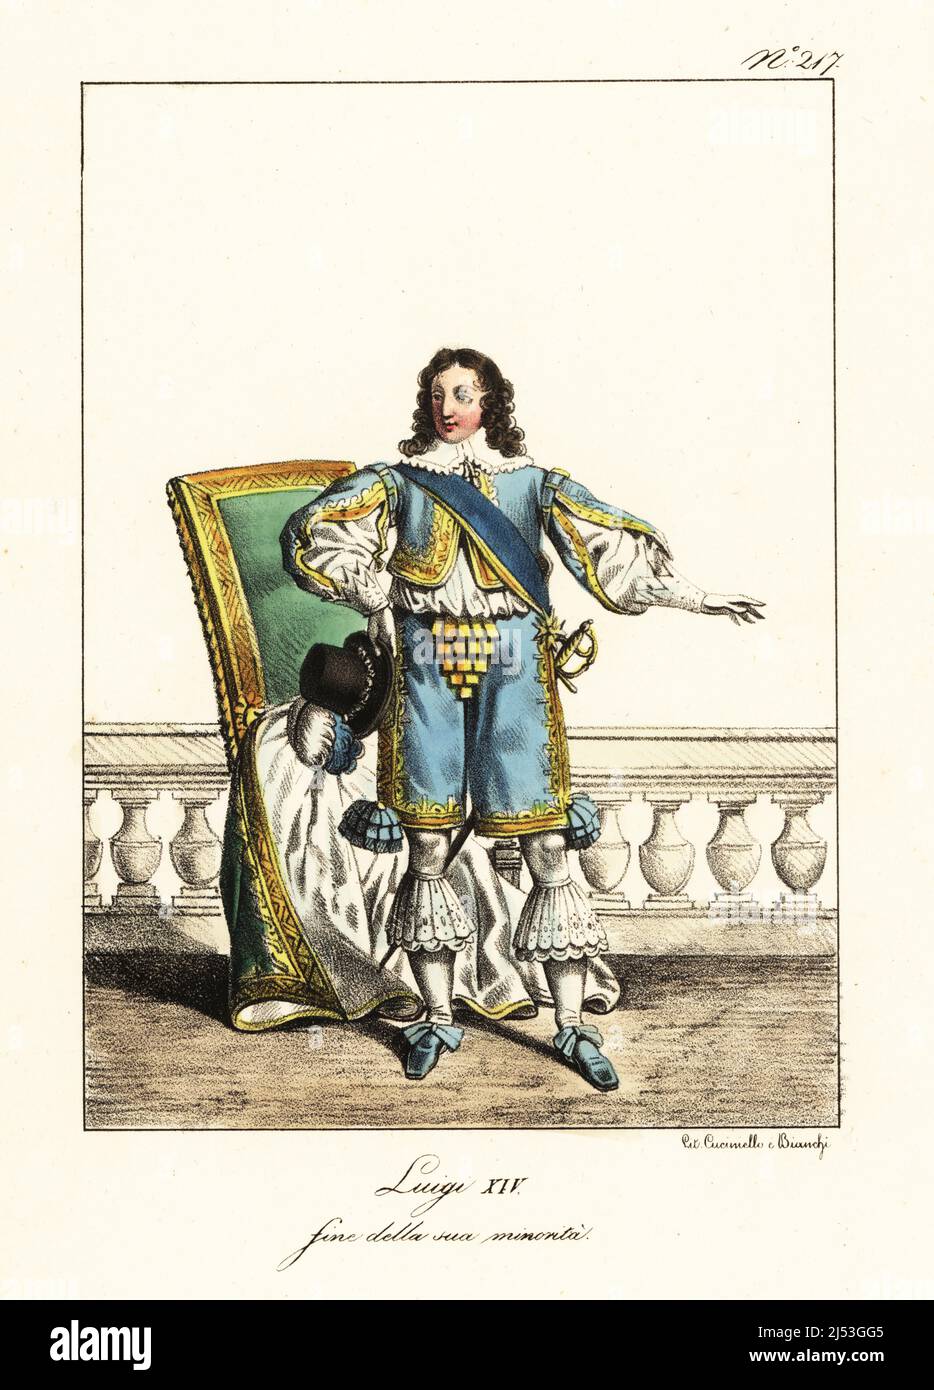 King Louis XIV of France at the end of his minority, about age 16, circa 1650. In plumed hat, lace collar, short jacket with slashed sleeves, pantalons, hose with lace garters, shoes with ribbons, court sword. Louis XIV, fin de sa minorite. Handcoloured lithograph by Lorenzo Bianchi and Domenico Cuciniello after Hippolyte Lecomte from Costumi civili e militari della monarchia francese dal 1200 al 1820, Naples, 1825. Italian edition of Lecomte’s Civilian and military costumes of the French monarchy from 1200 to 1820. Stock Photo